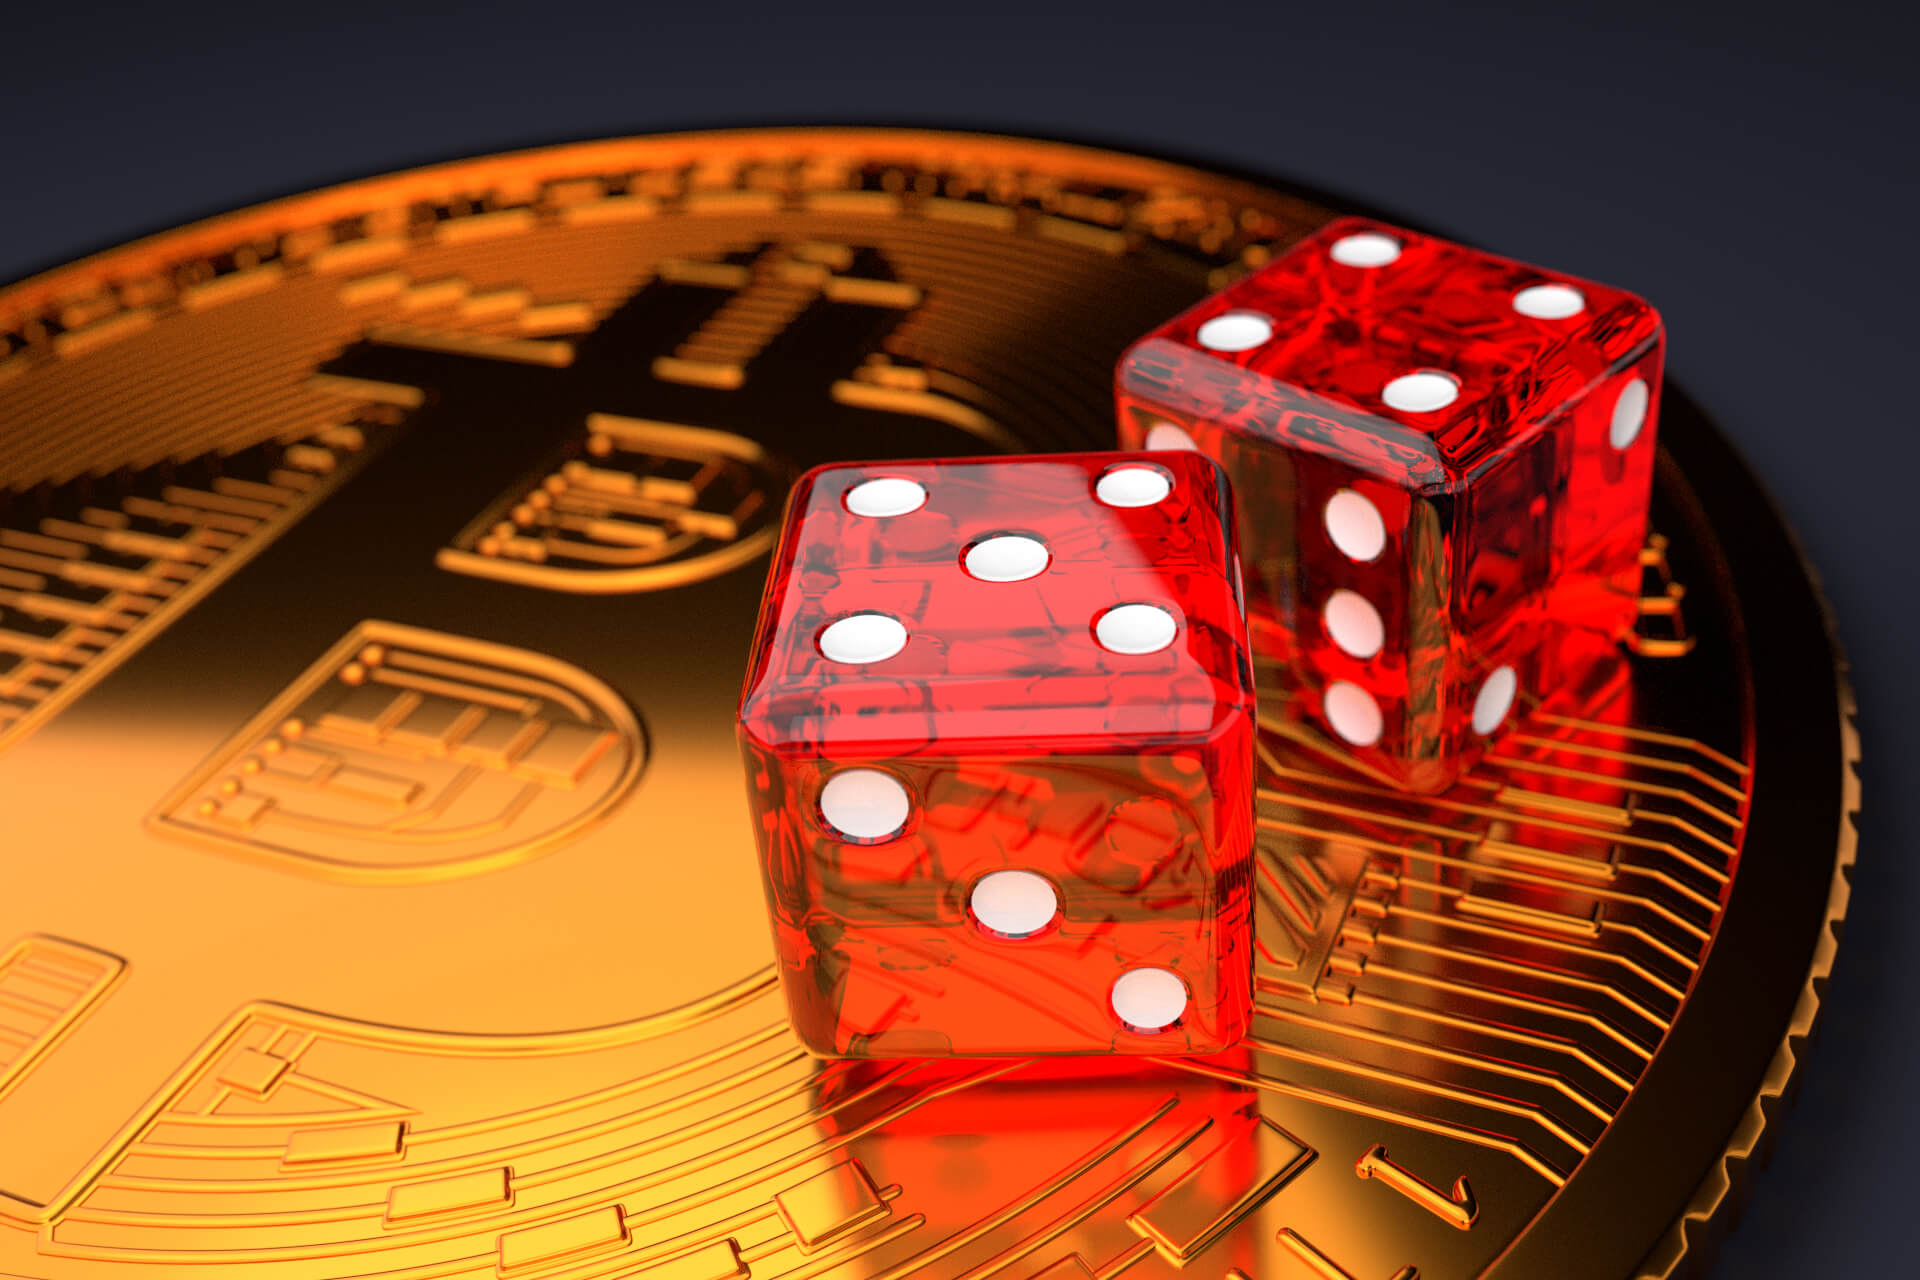 2. Impact of Online Gambling​ on Traditional Casinos